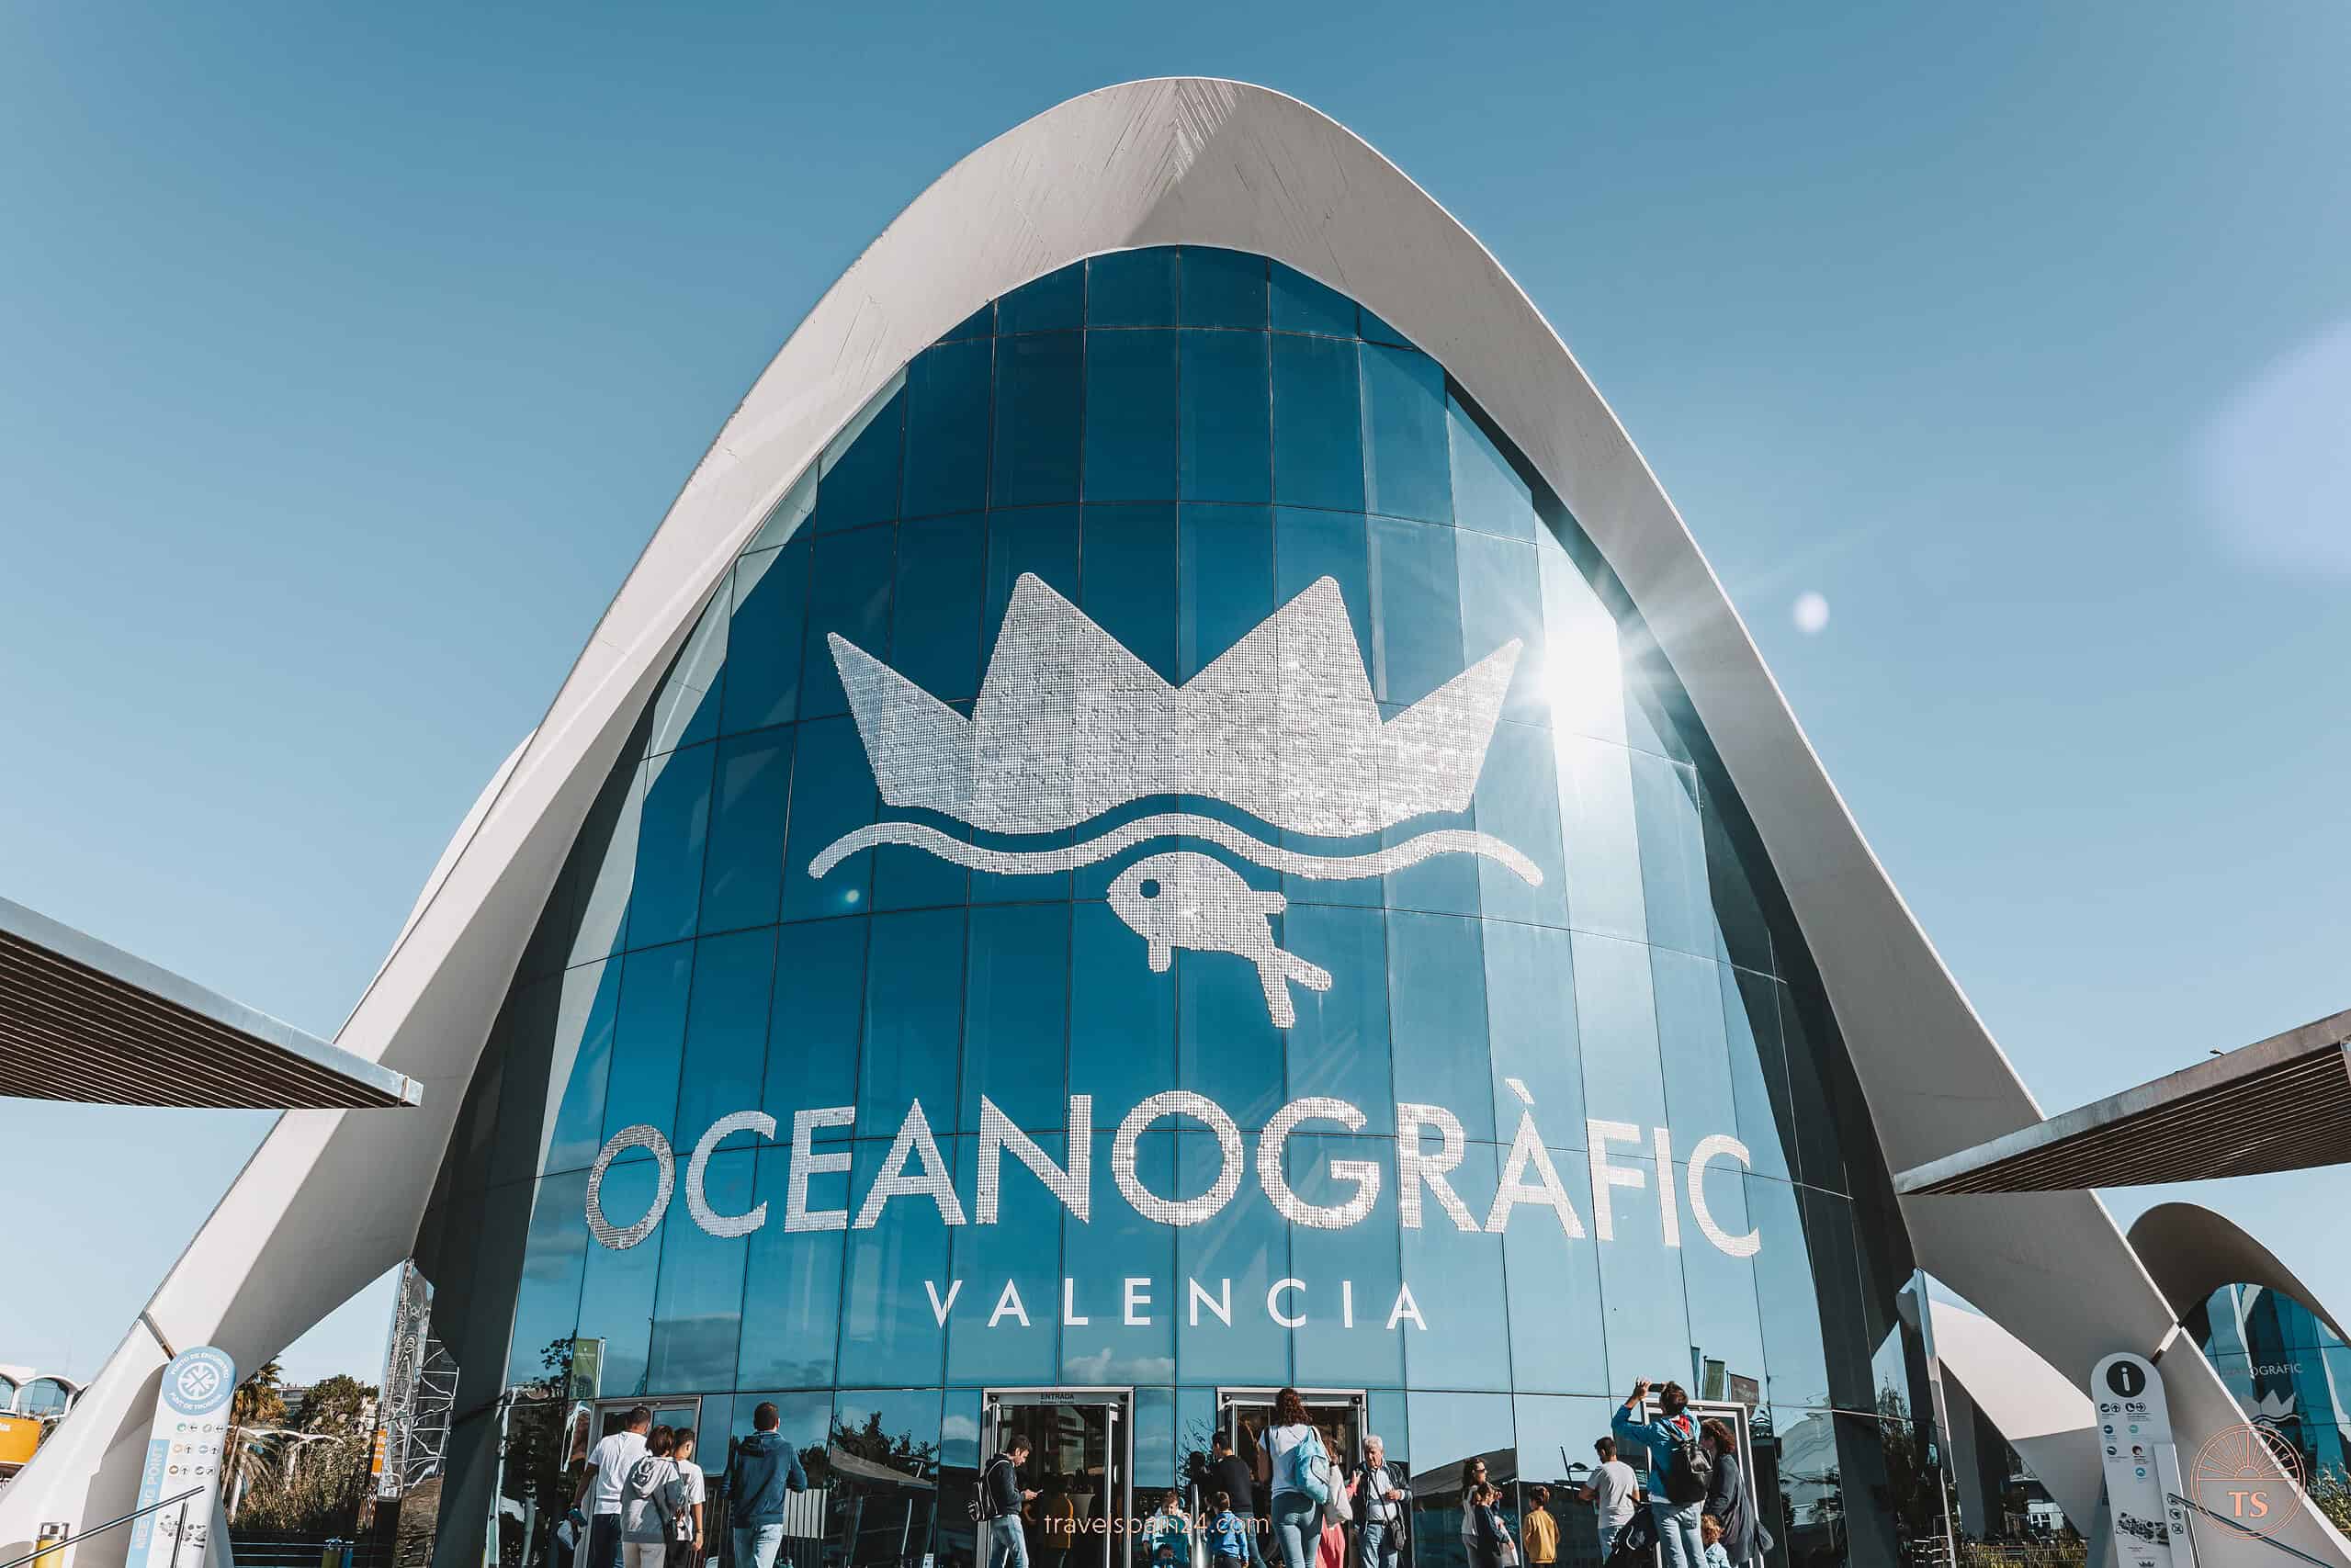 Busy entrance of Oceanografic Valencia, Europe's largest aquarium, featuring a striking architectural design with an arched entrance and large blue windows bearing the aquarium's logo.